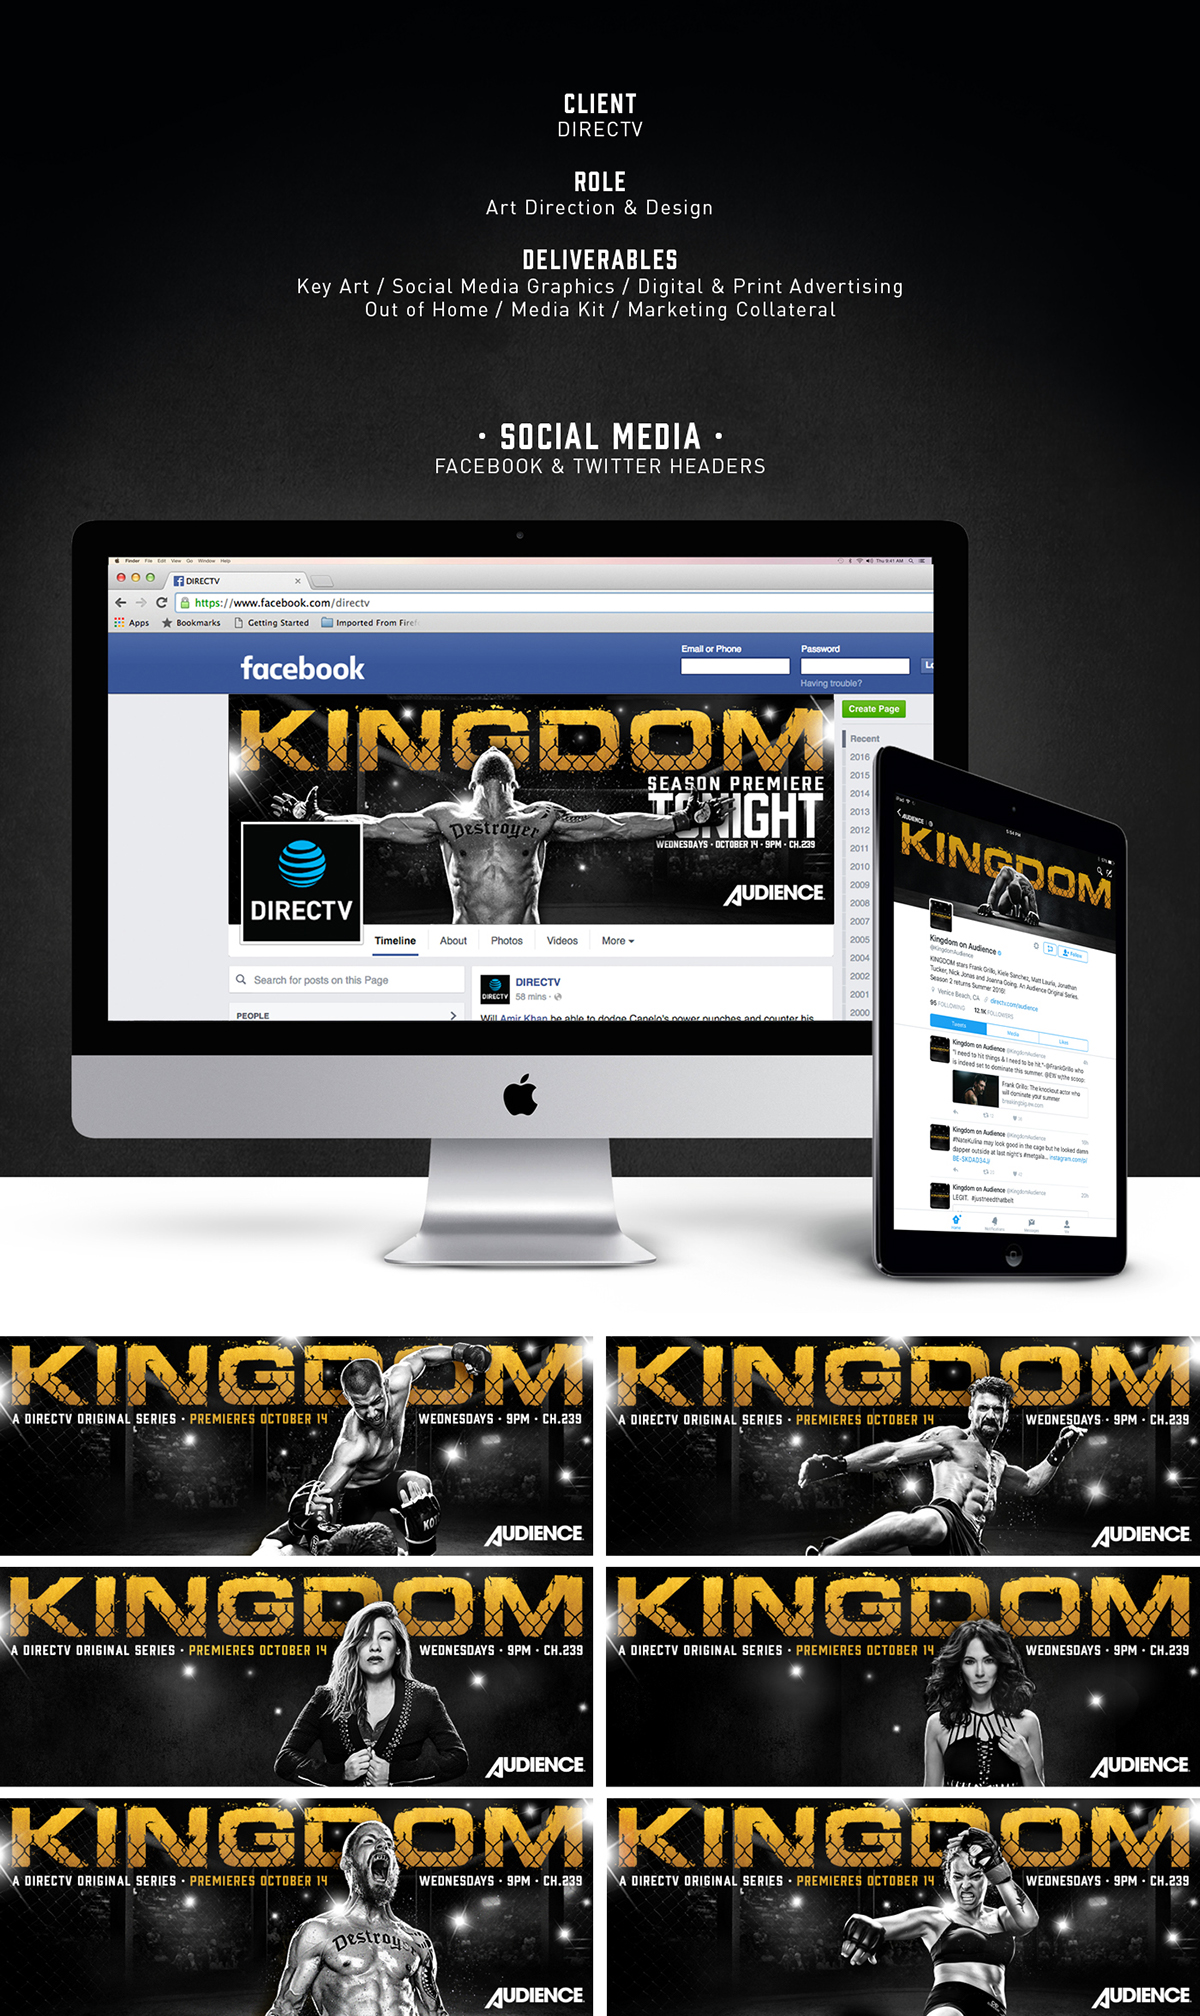 Adobe Portfolio kingdom DirecTV MMA Mixed martial arts tv show hollywood venice beach Television Show AT&T audience network fighting UFC